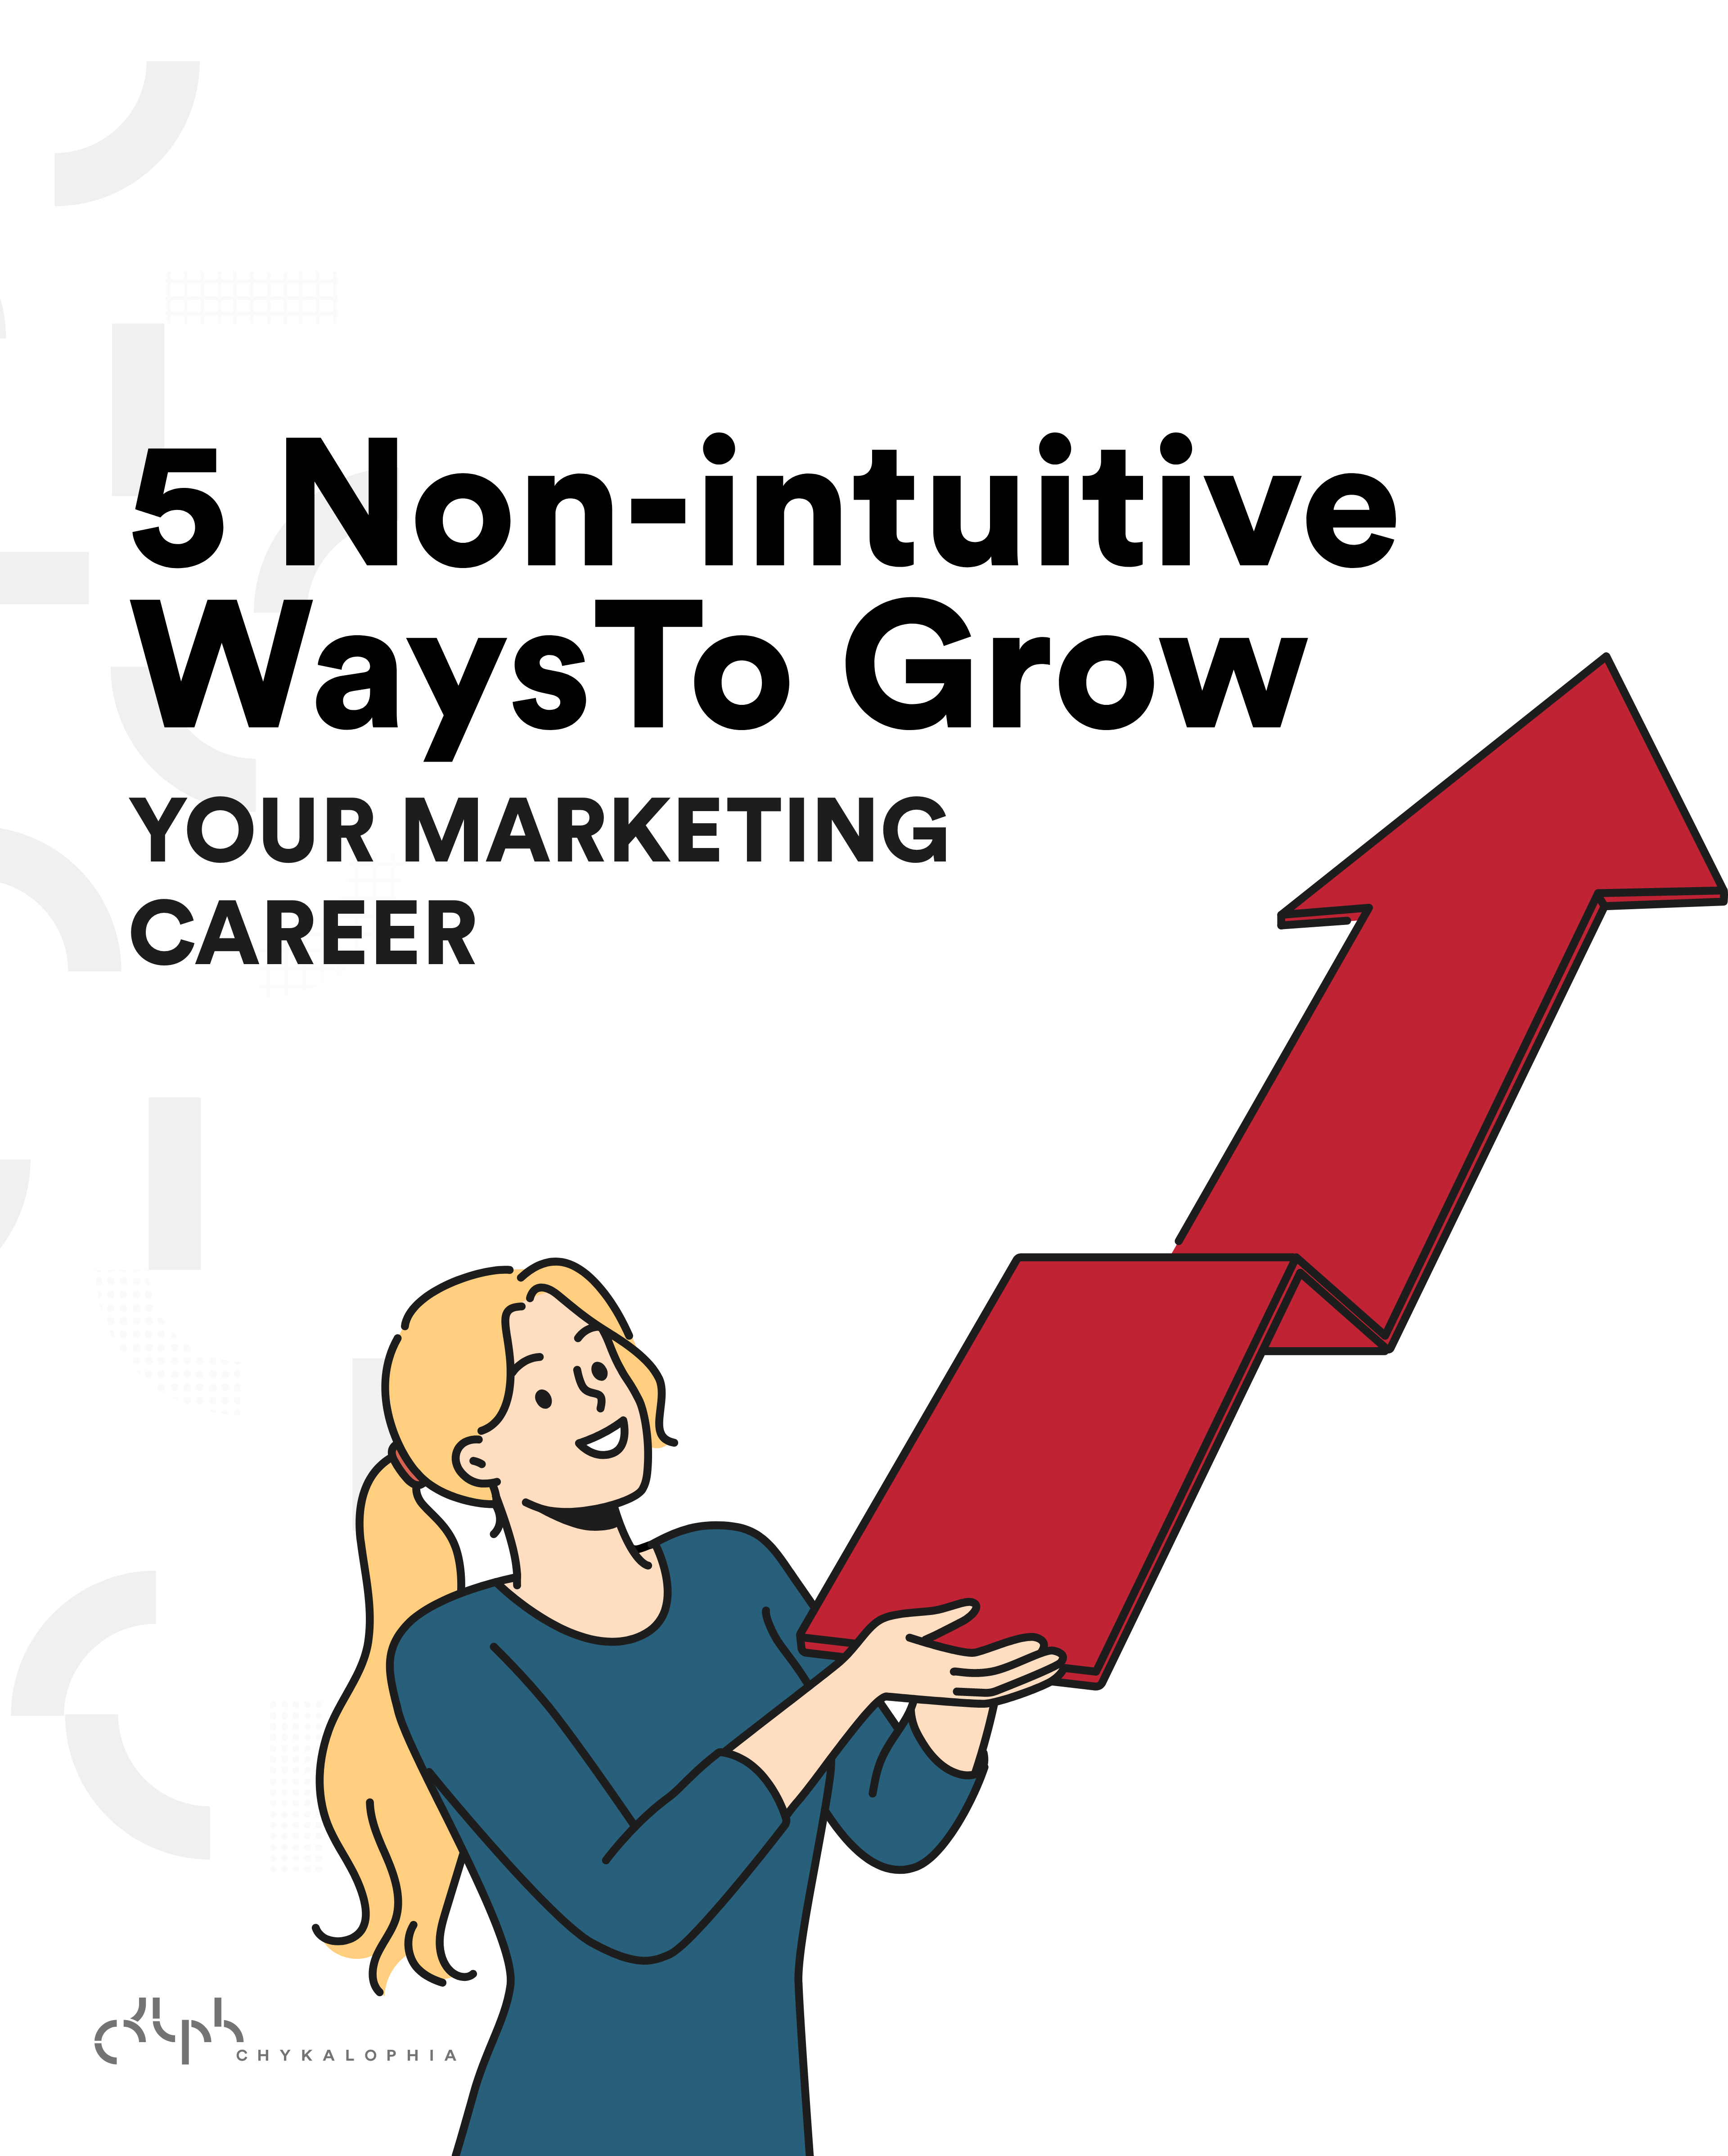 How to grow as a markteter and grow your marketing career